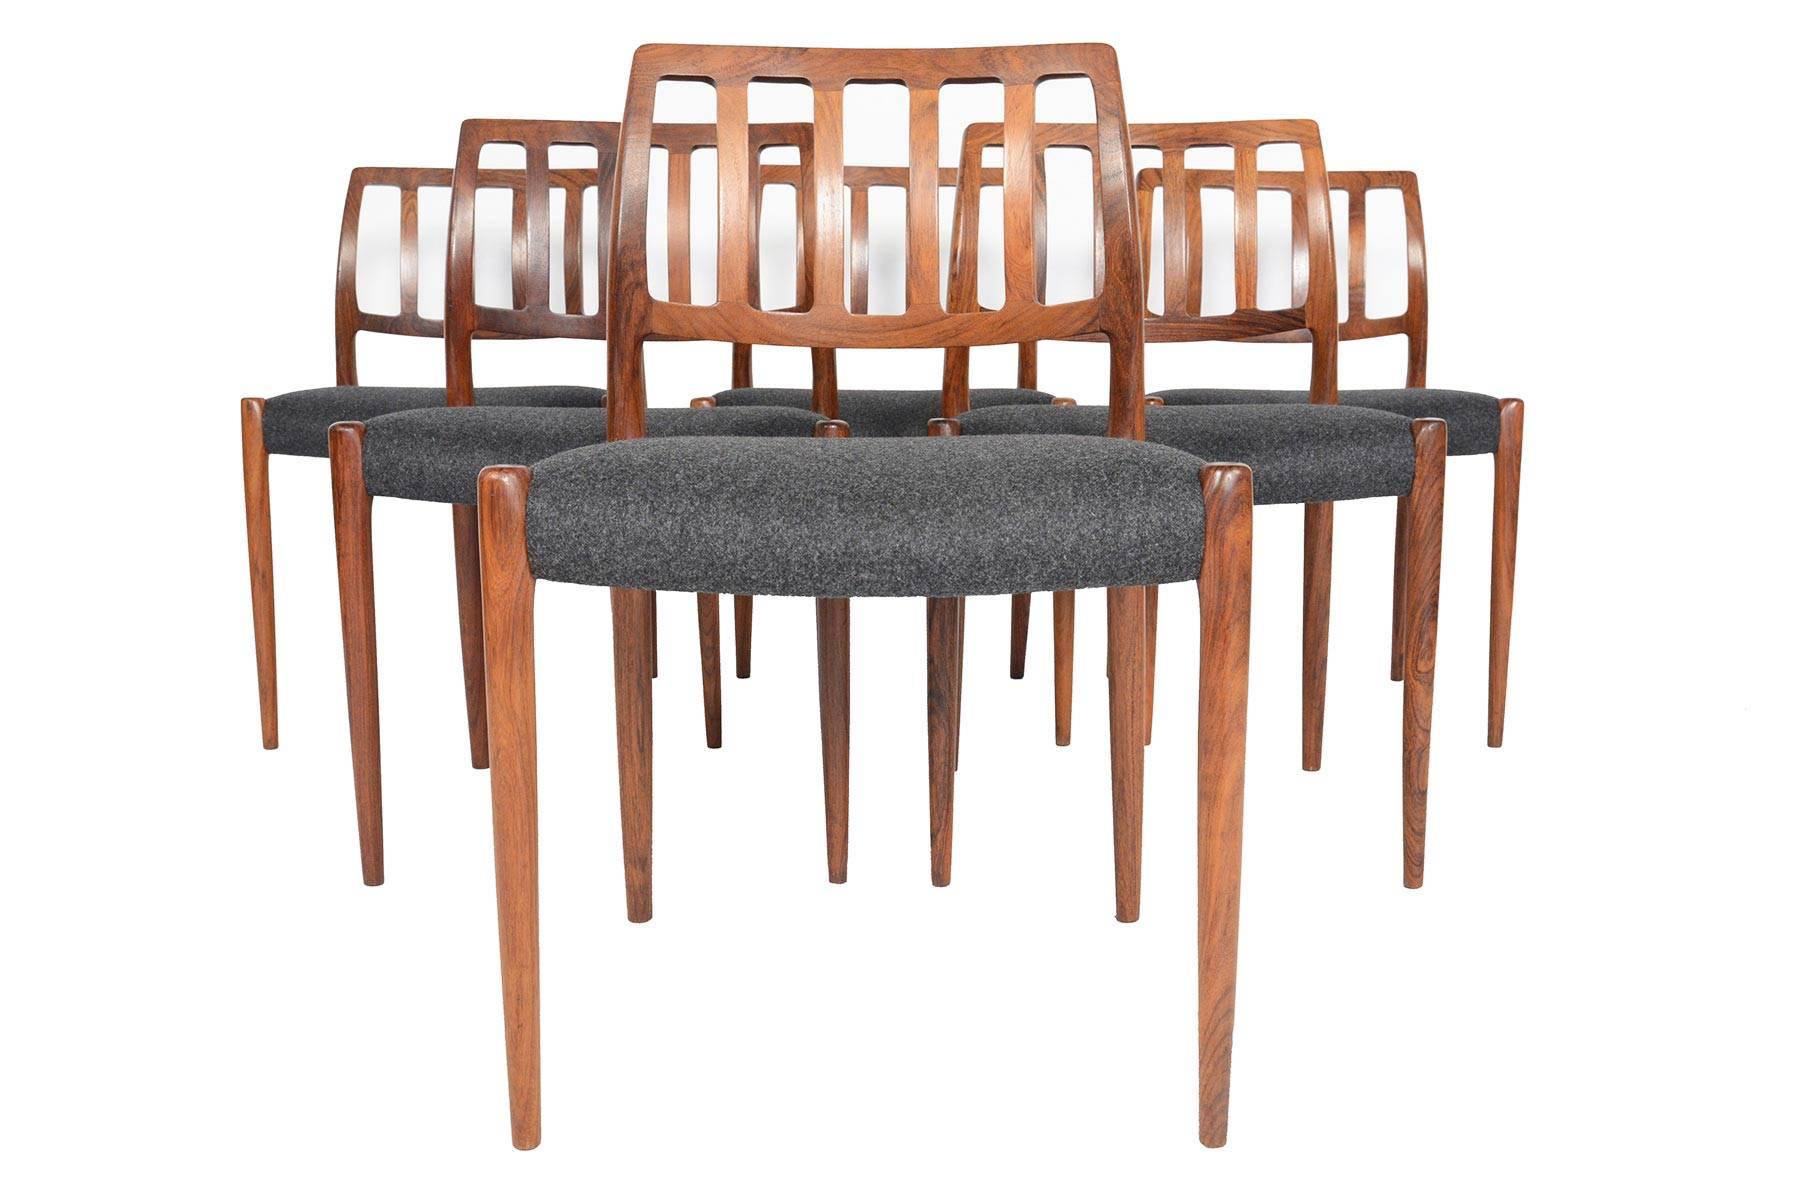 This beautiful set of six model 83 rosewood dining chairs was designed by Niels Otto Møller for J.L. Møllers Møbelfabrik ion 1974. Crafted in solid rosewood, each frame features rich and active woodgrain with a focus of ergonomics and sturdy